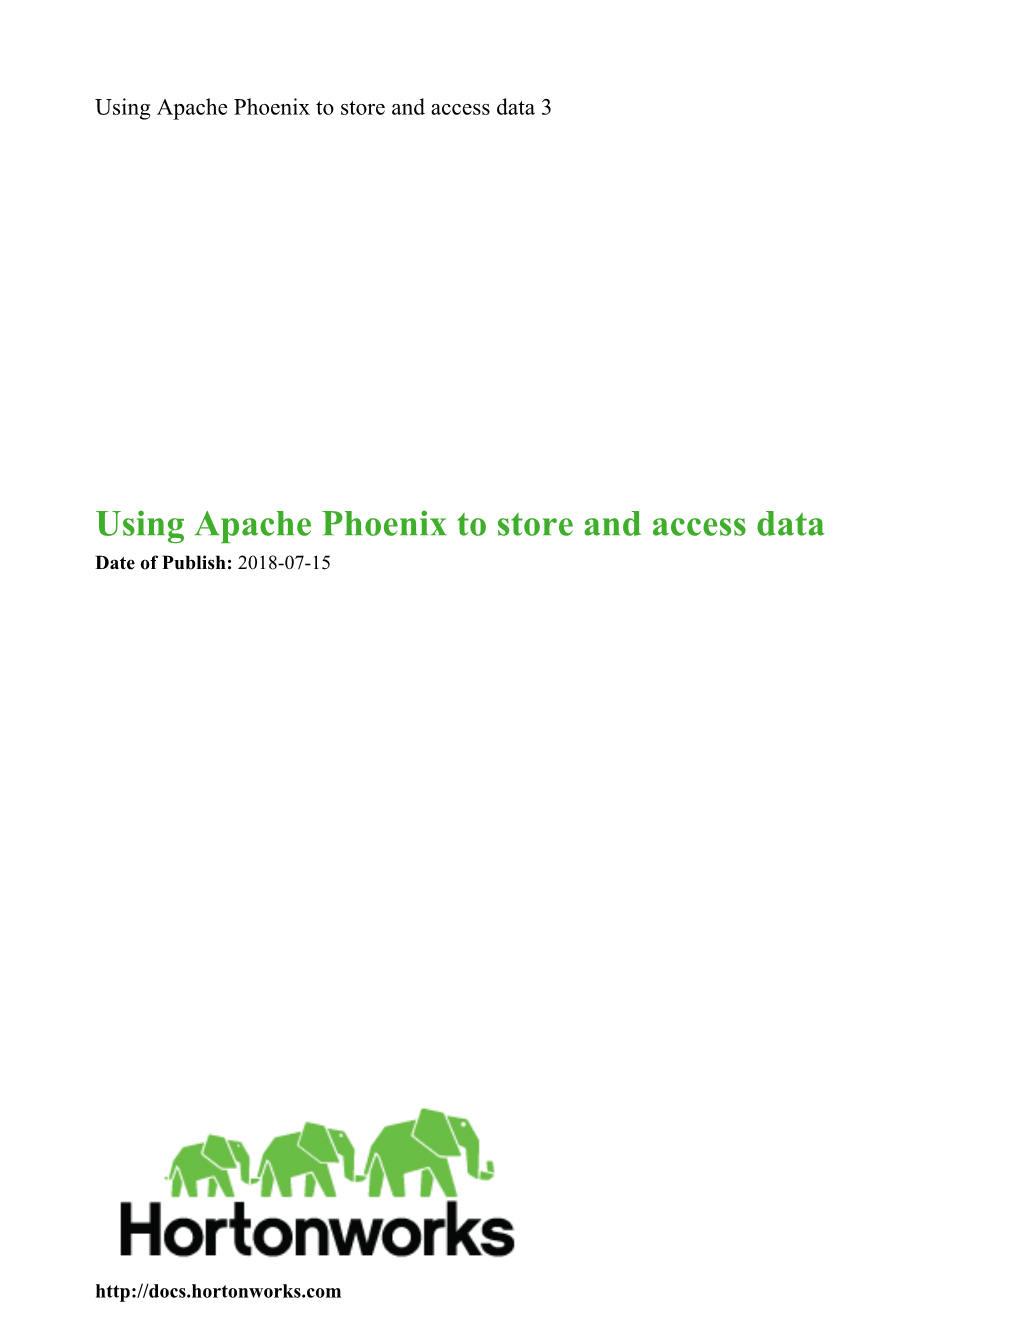 Using Apache Phoenix to Store and Access Data 3